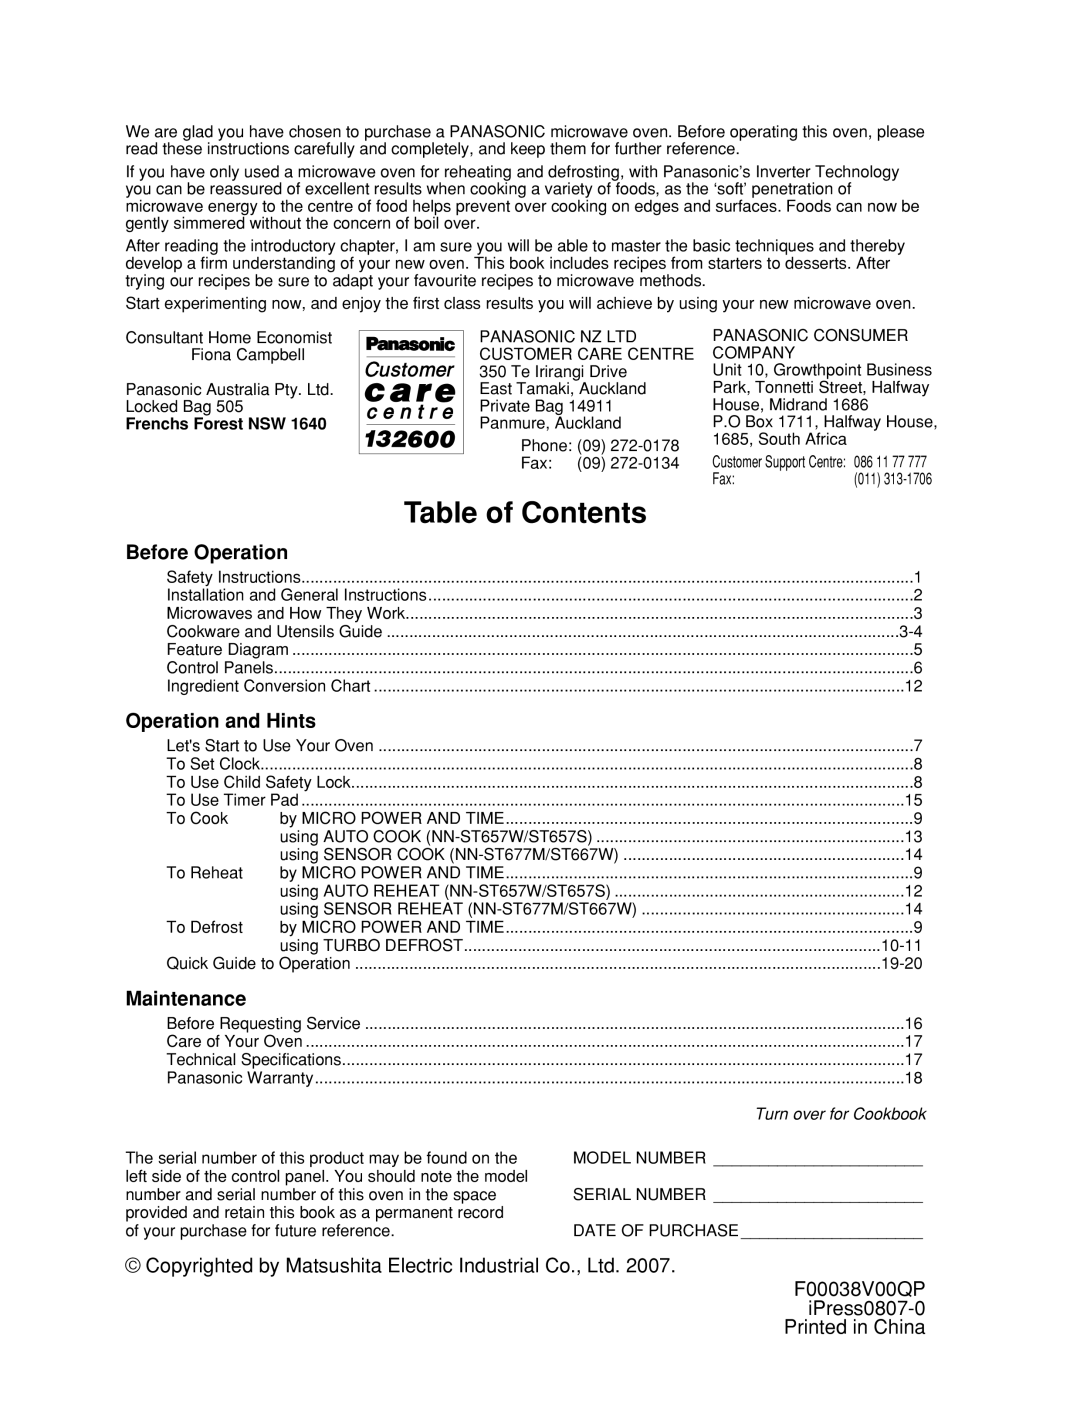 Panasonic NN-ST657 W Table of Contents, Before Operation, Operation and Hints, Maintenance, F00038V00QP, iPress0807-0 